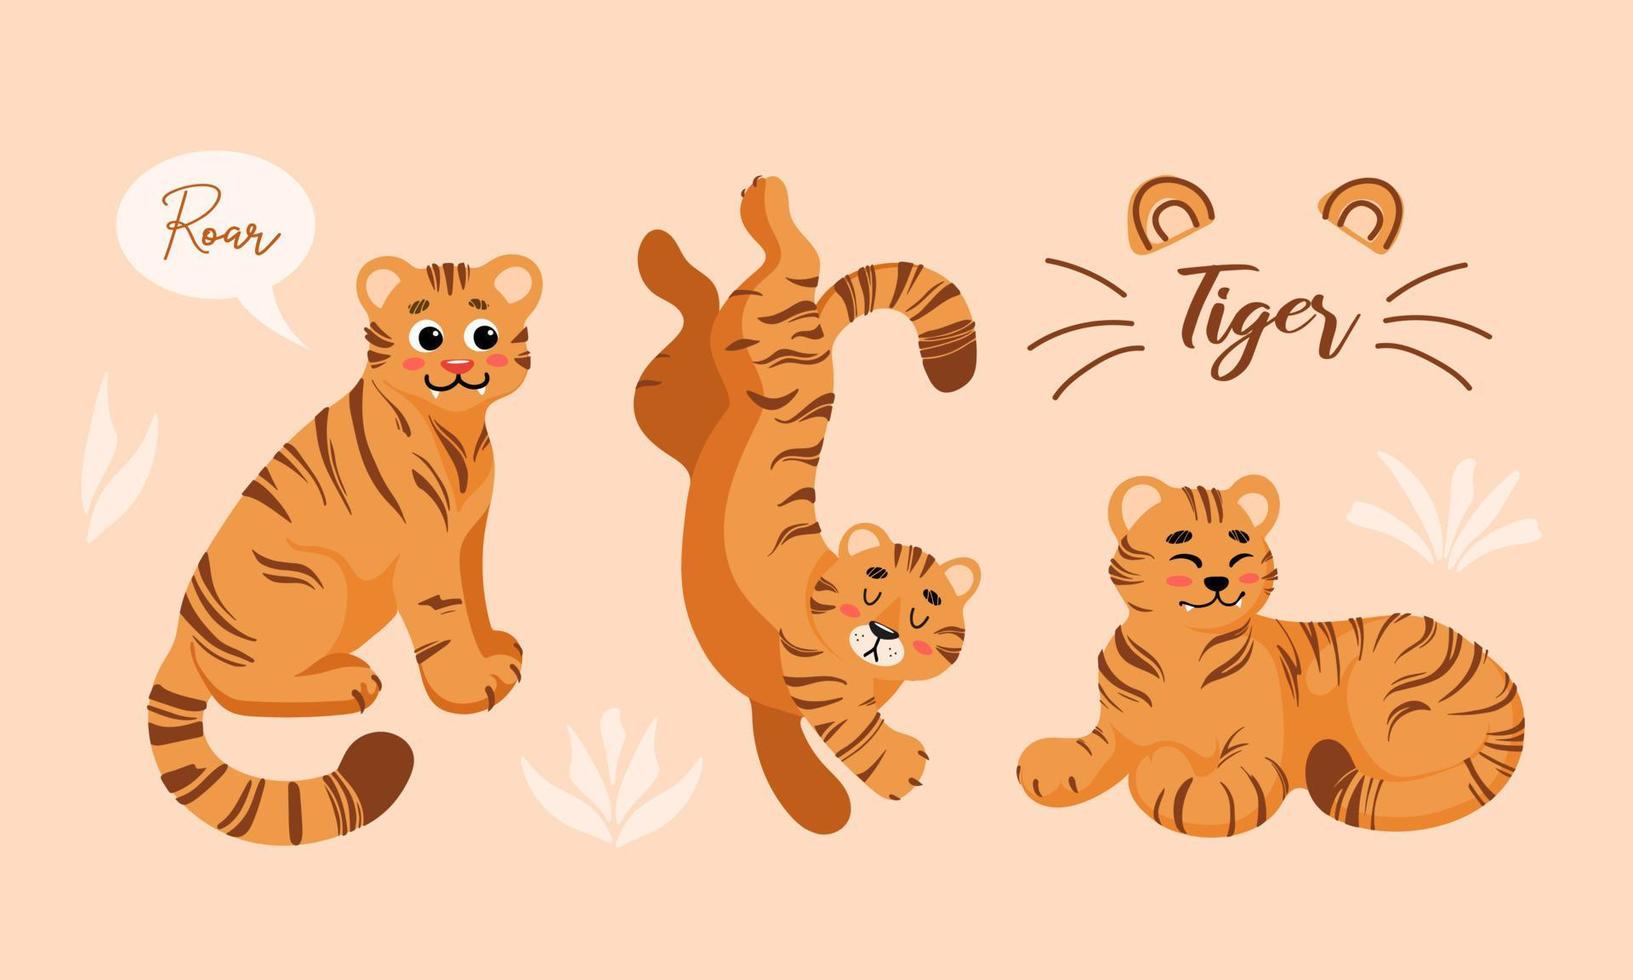 Set of vector childish colored cartoon illustrations of cute tiger in different positions isolated icon. For stickers, posters, postcards, banners, pet products. Tiger Day. Chinese New Year 2022.